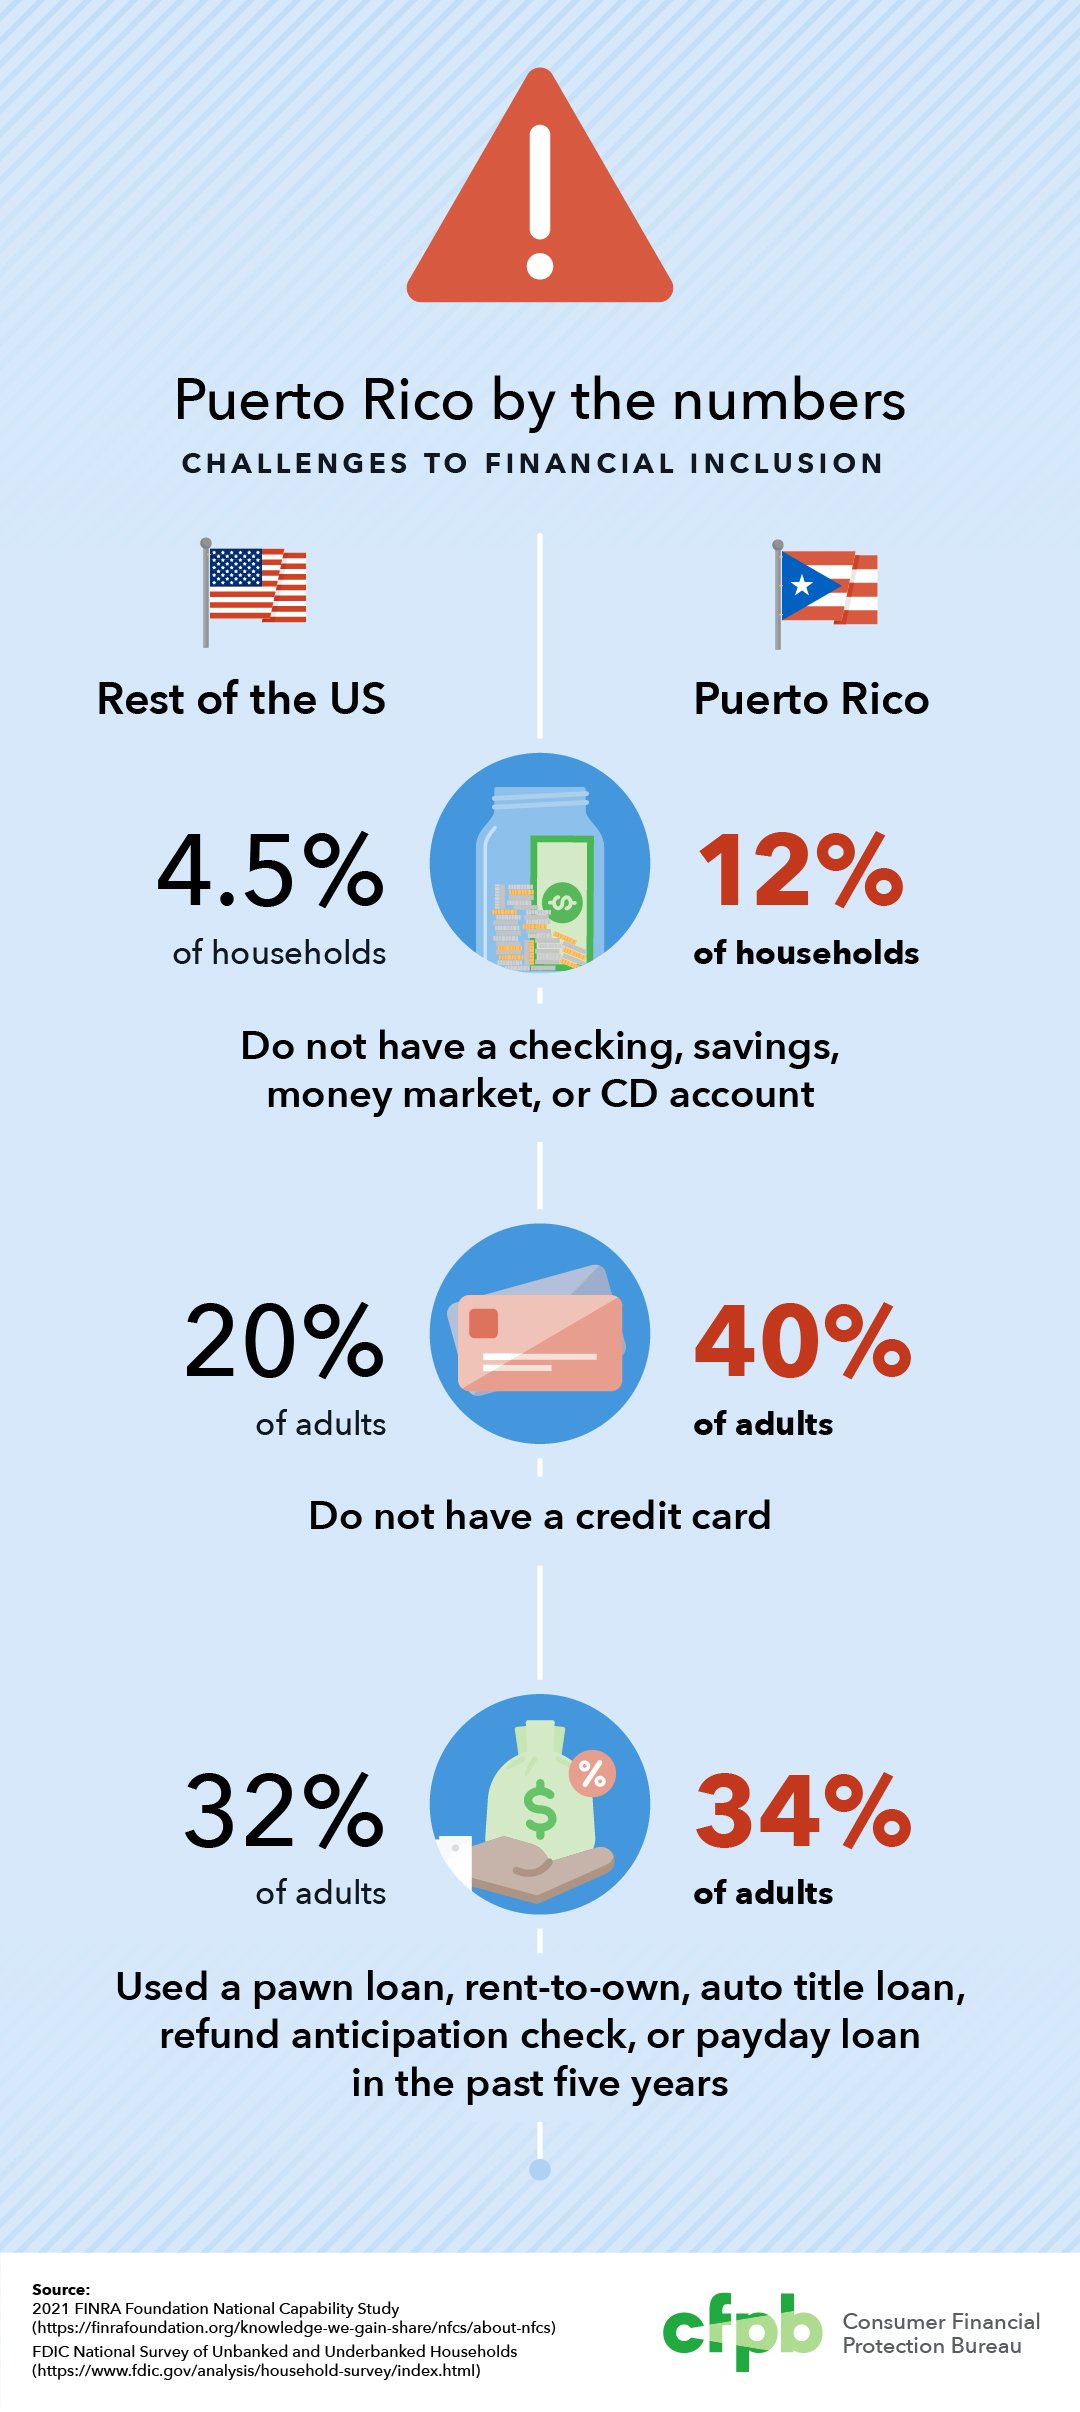 Puerto Rico by the numbers - Challenges to financial inclusion. The share of adults that do not have a checking, savings, money market, or CD account is 12 percent in Puerto Rico and 4.5 percent for the rest of the U.S. The share of adults that do not have a credit card is 40 percent in Puerto Rico and 20 percent in the rest of the U.S. The share of adults that used a pawn loan, rent-to-own, auto title loan, refund anticipation check, or payday loan in the past five years was 34 percent in Puerto Rico and 32 percent in the rest of the U.S.